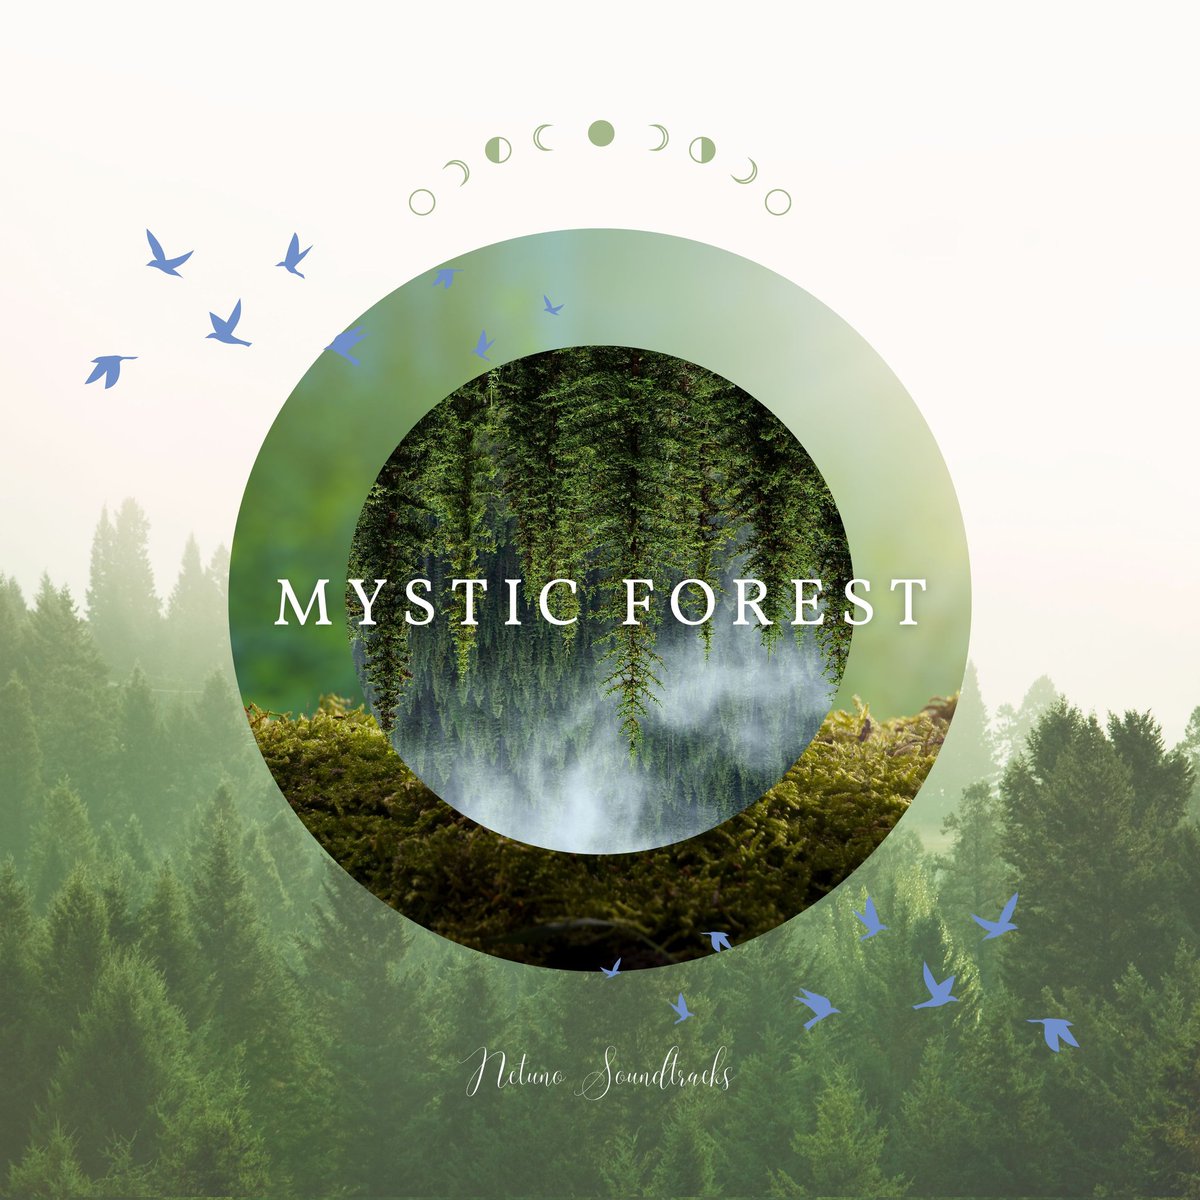 🚨 New Music Alert 🚨

'Mystic Forest' is an ambient meditative ethereal music track.

Streaming platforms/download/licensing this music:
bio.link/netuno

#meditationmusic #meditation #relaxingmusic #yogamusic #music #ambientmusic #meditationpractice #meditationspace